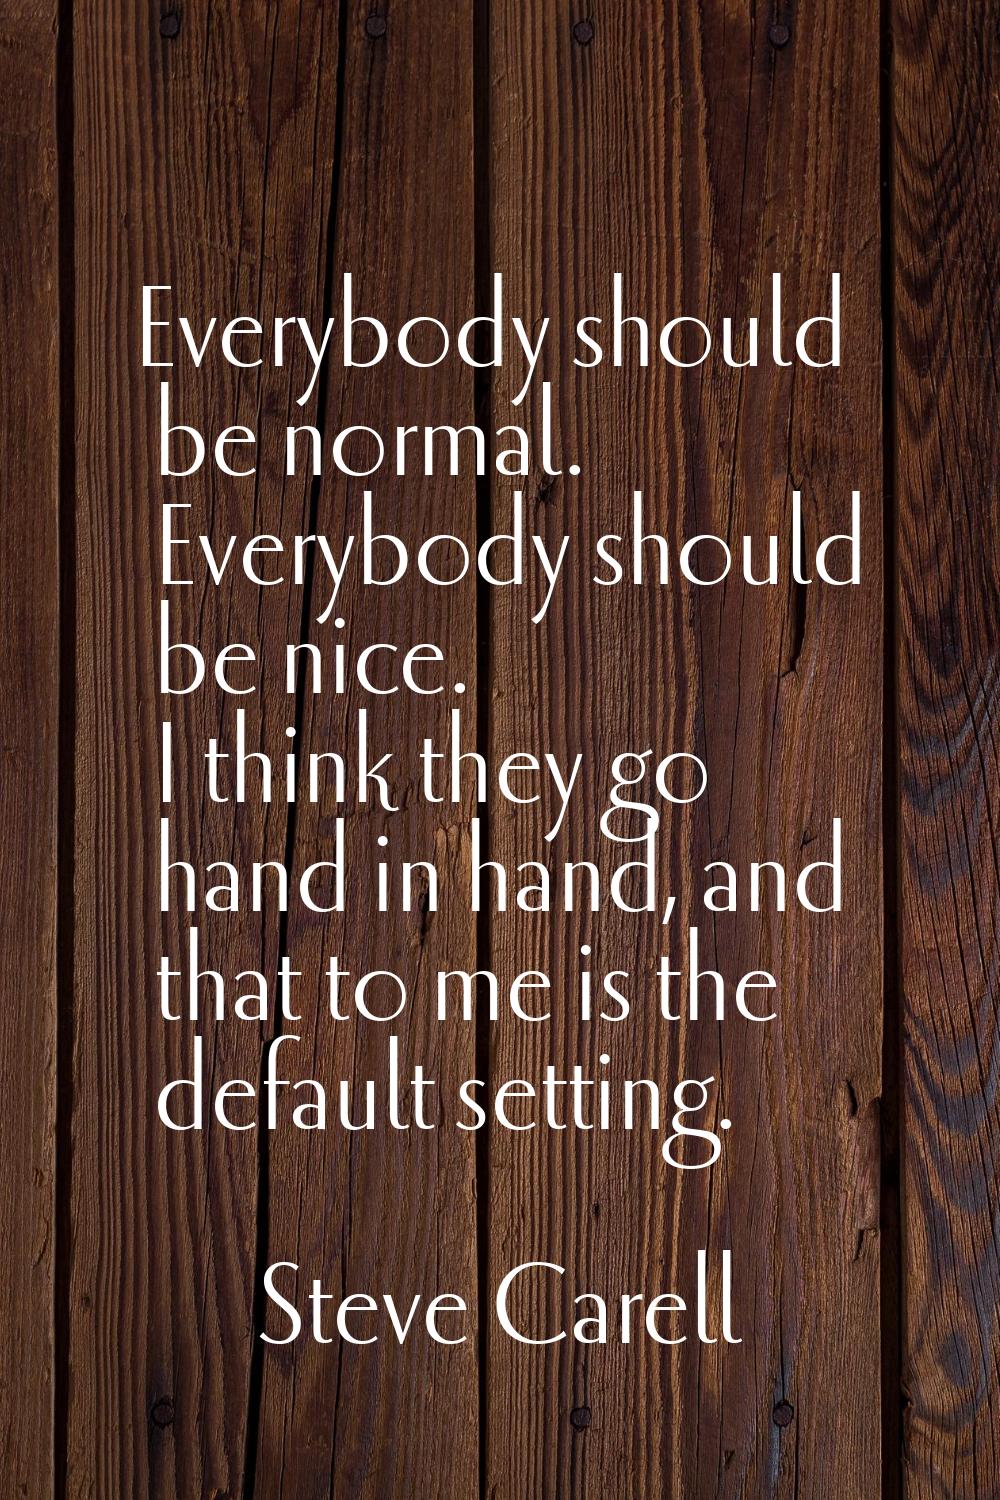 Everybody should be normal. Everybody should be nice. I think they go hand in hand, and that to me 